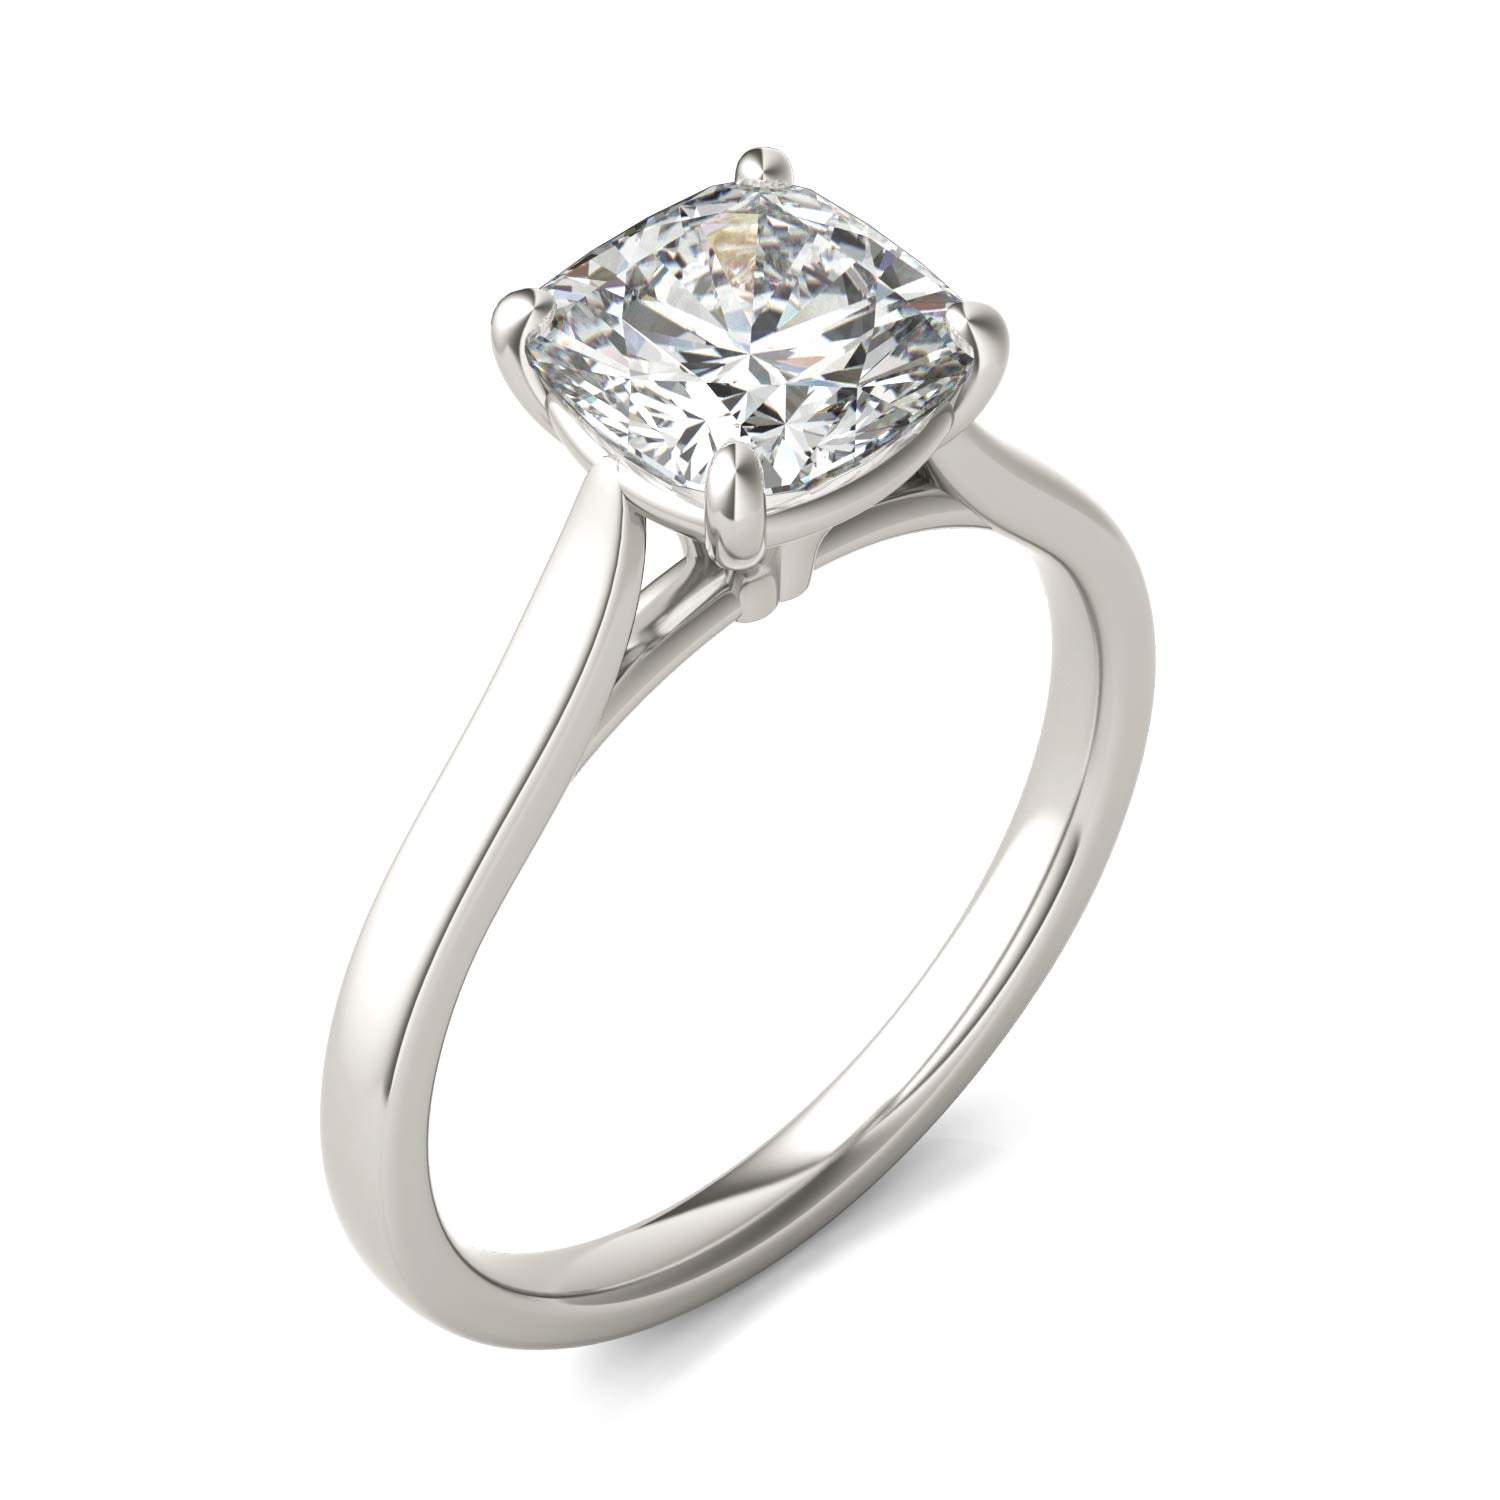 2.00 CTW DEW Cushion Moissanite Solitaire Engagement Ring in 14K White Gold